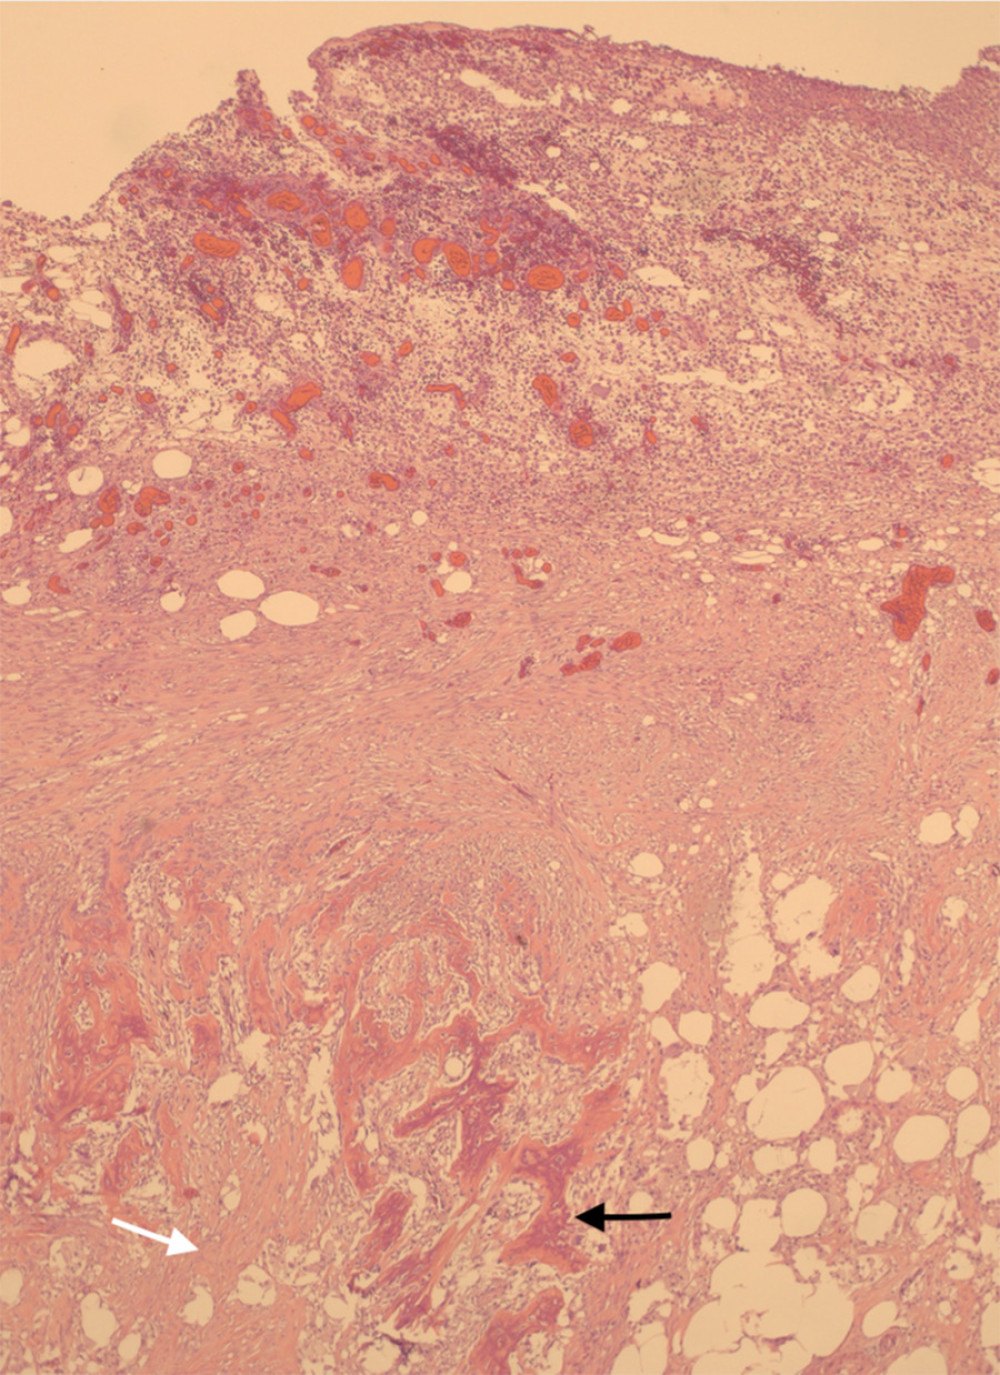 Histological analysis of surgical specimen. Wide image demonstrating mesenteric fibrosis (white arrow) and adhesion with idiopathic ossification (black arrow).